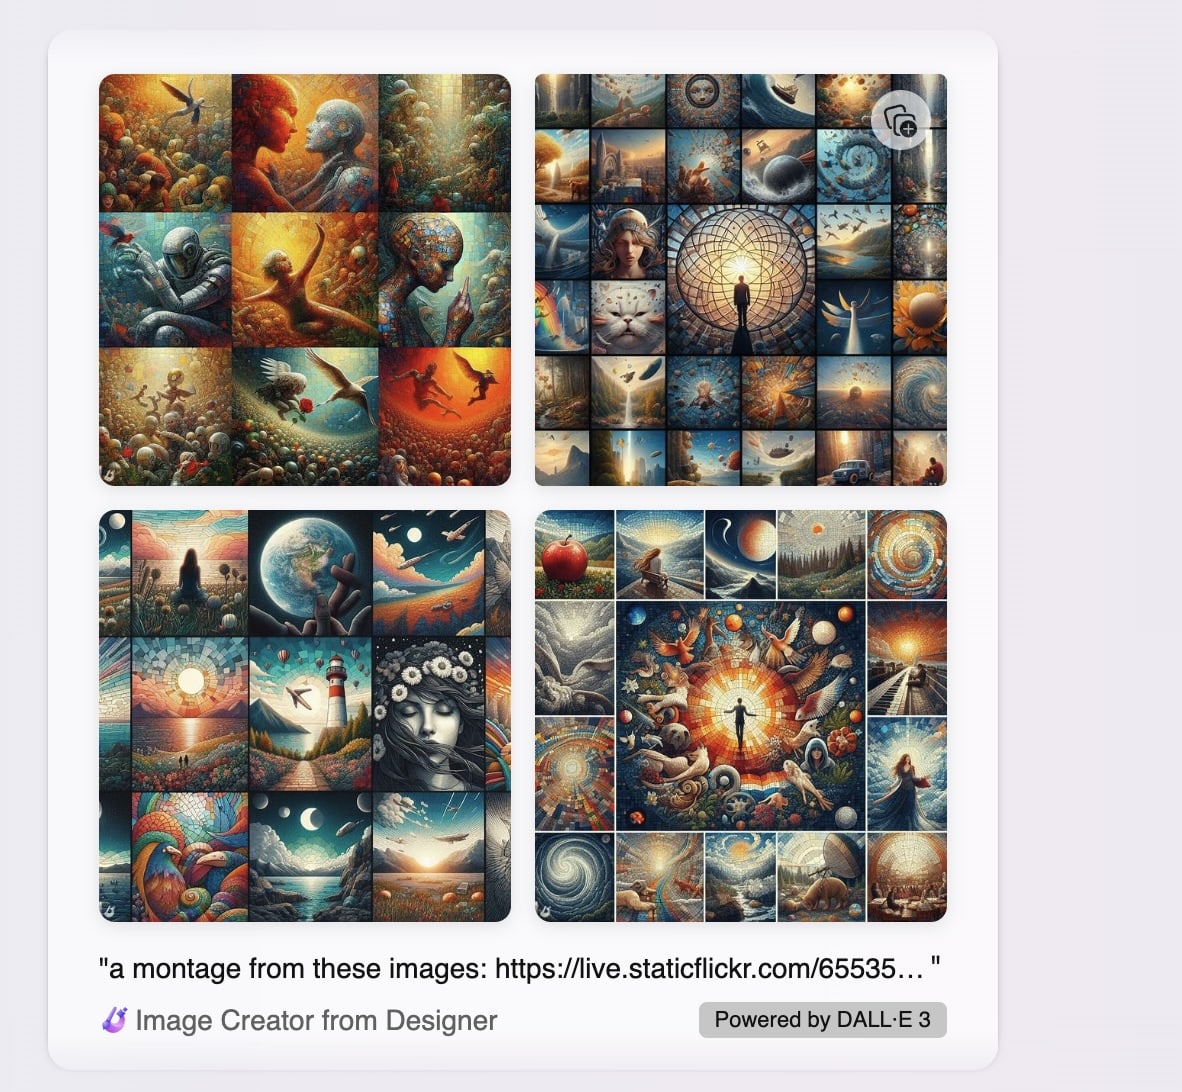 A screenshot of 4 images generated by bing, not what was asked for.